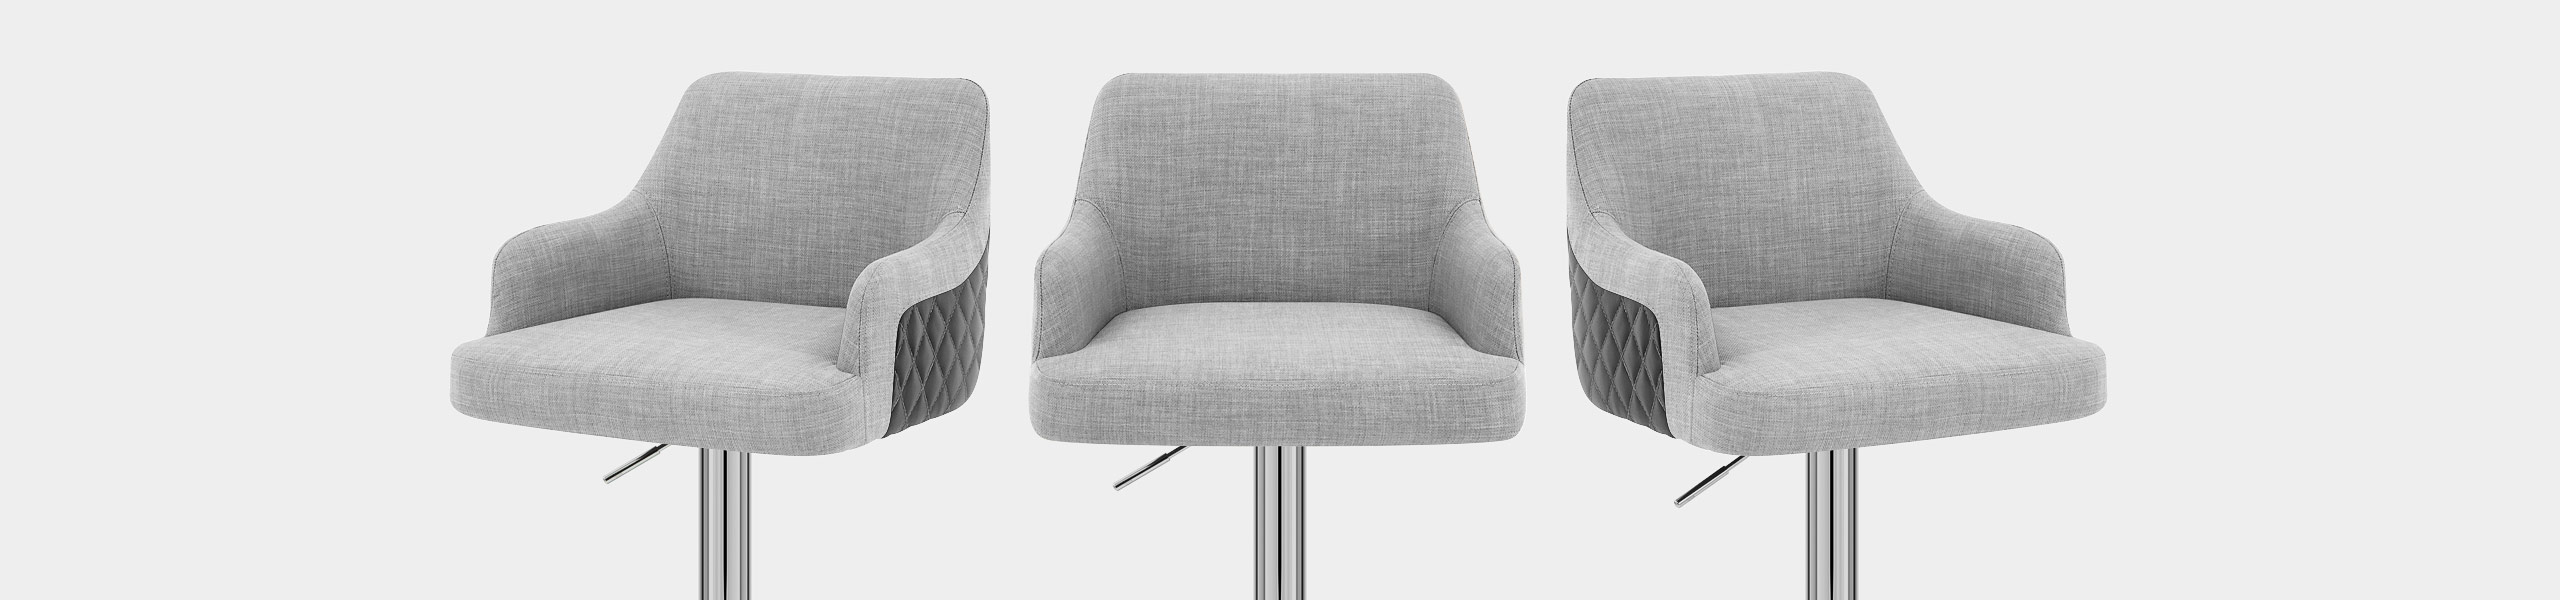 Dylan Stool Grey Leather & Grey Fabric Video Banner